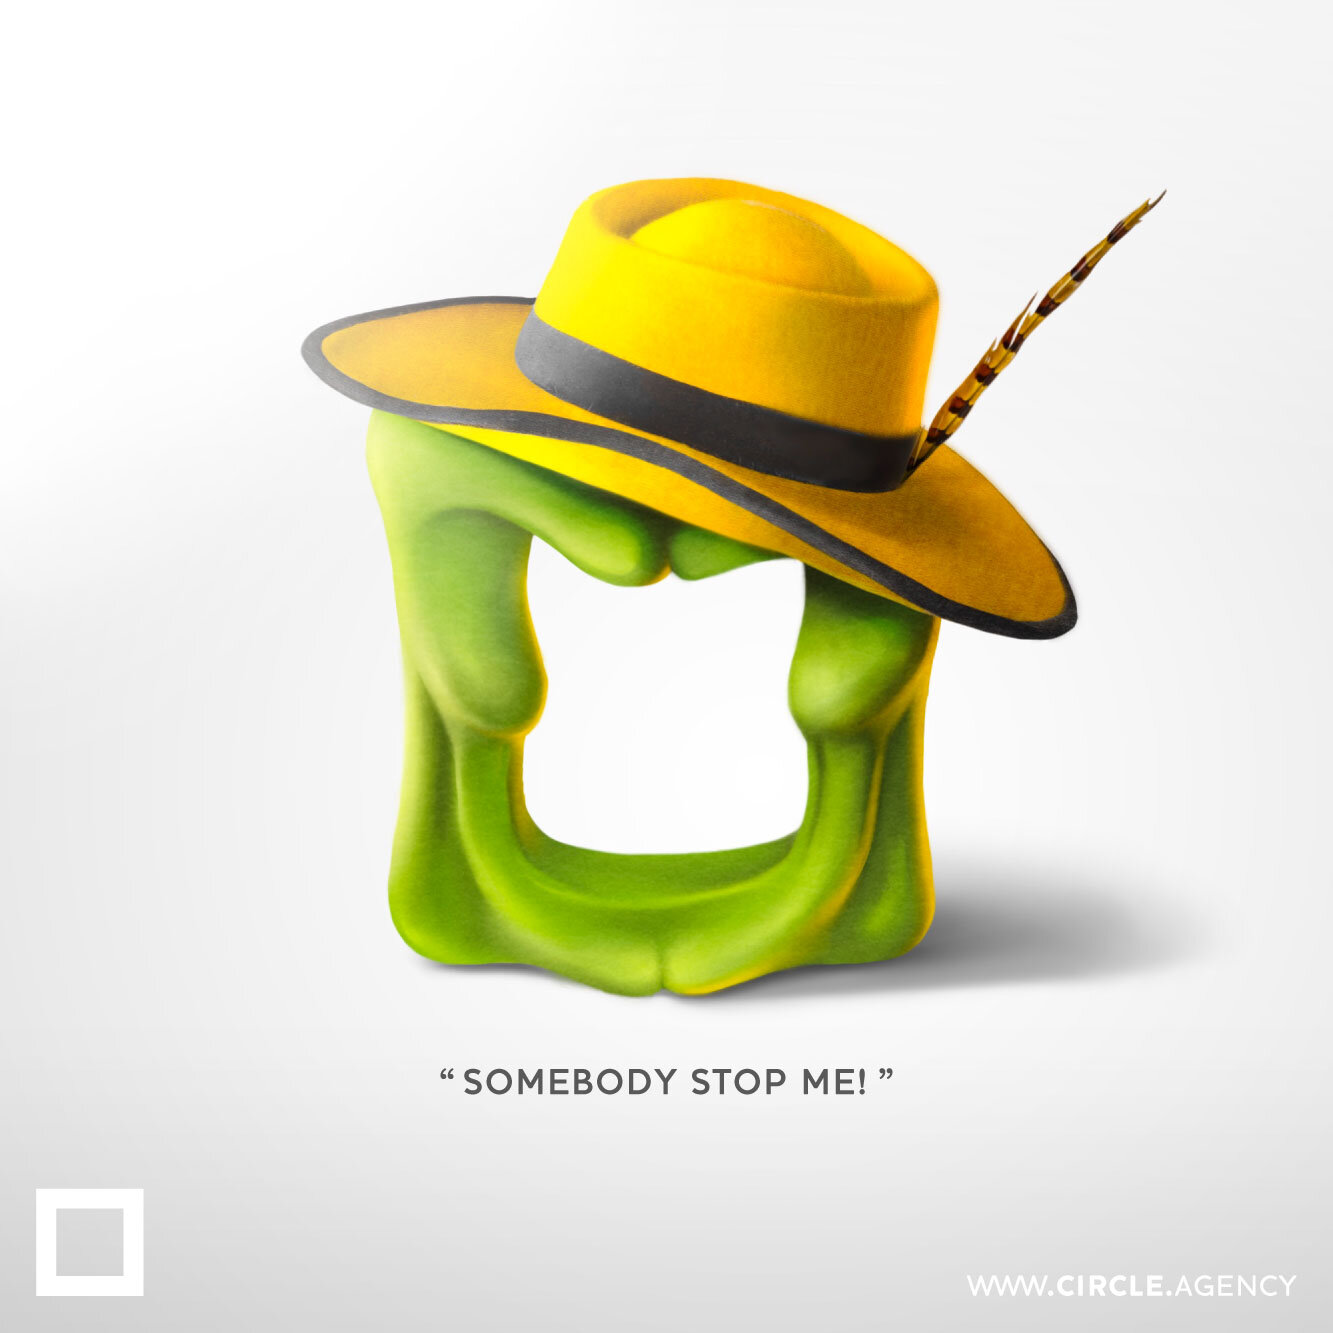 The_Mask_green_character_funny_yellow_hat_comedy_creative_square_shape_circle_visual_communication_branding_advertising_design_digital_media_agency.jpg